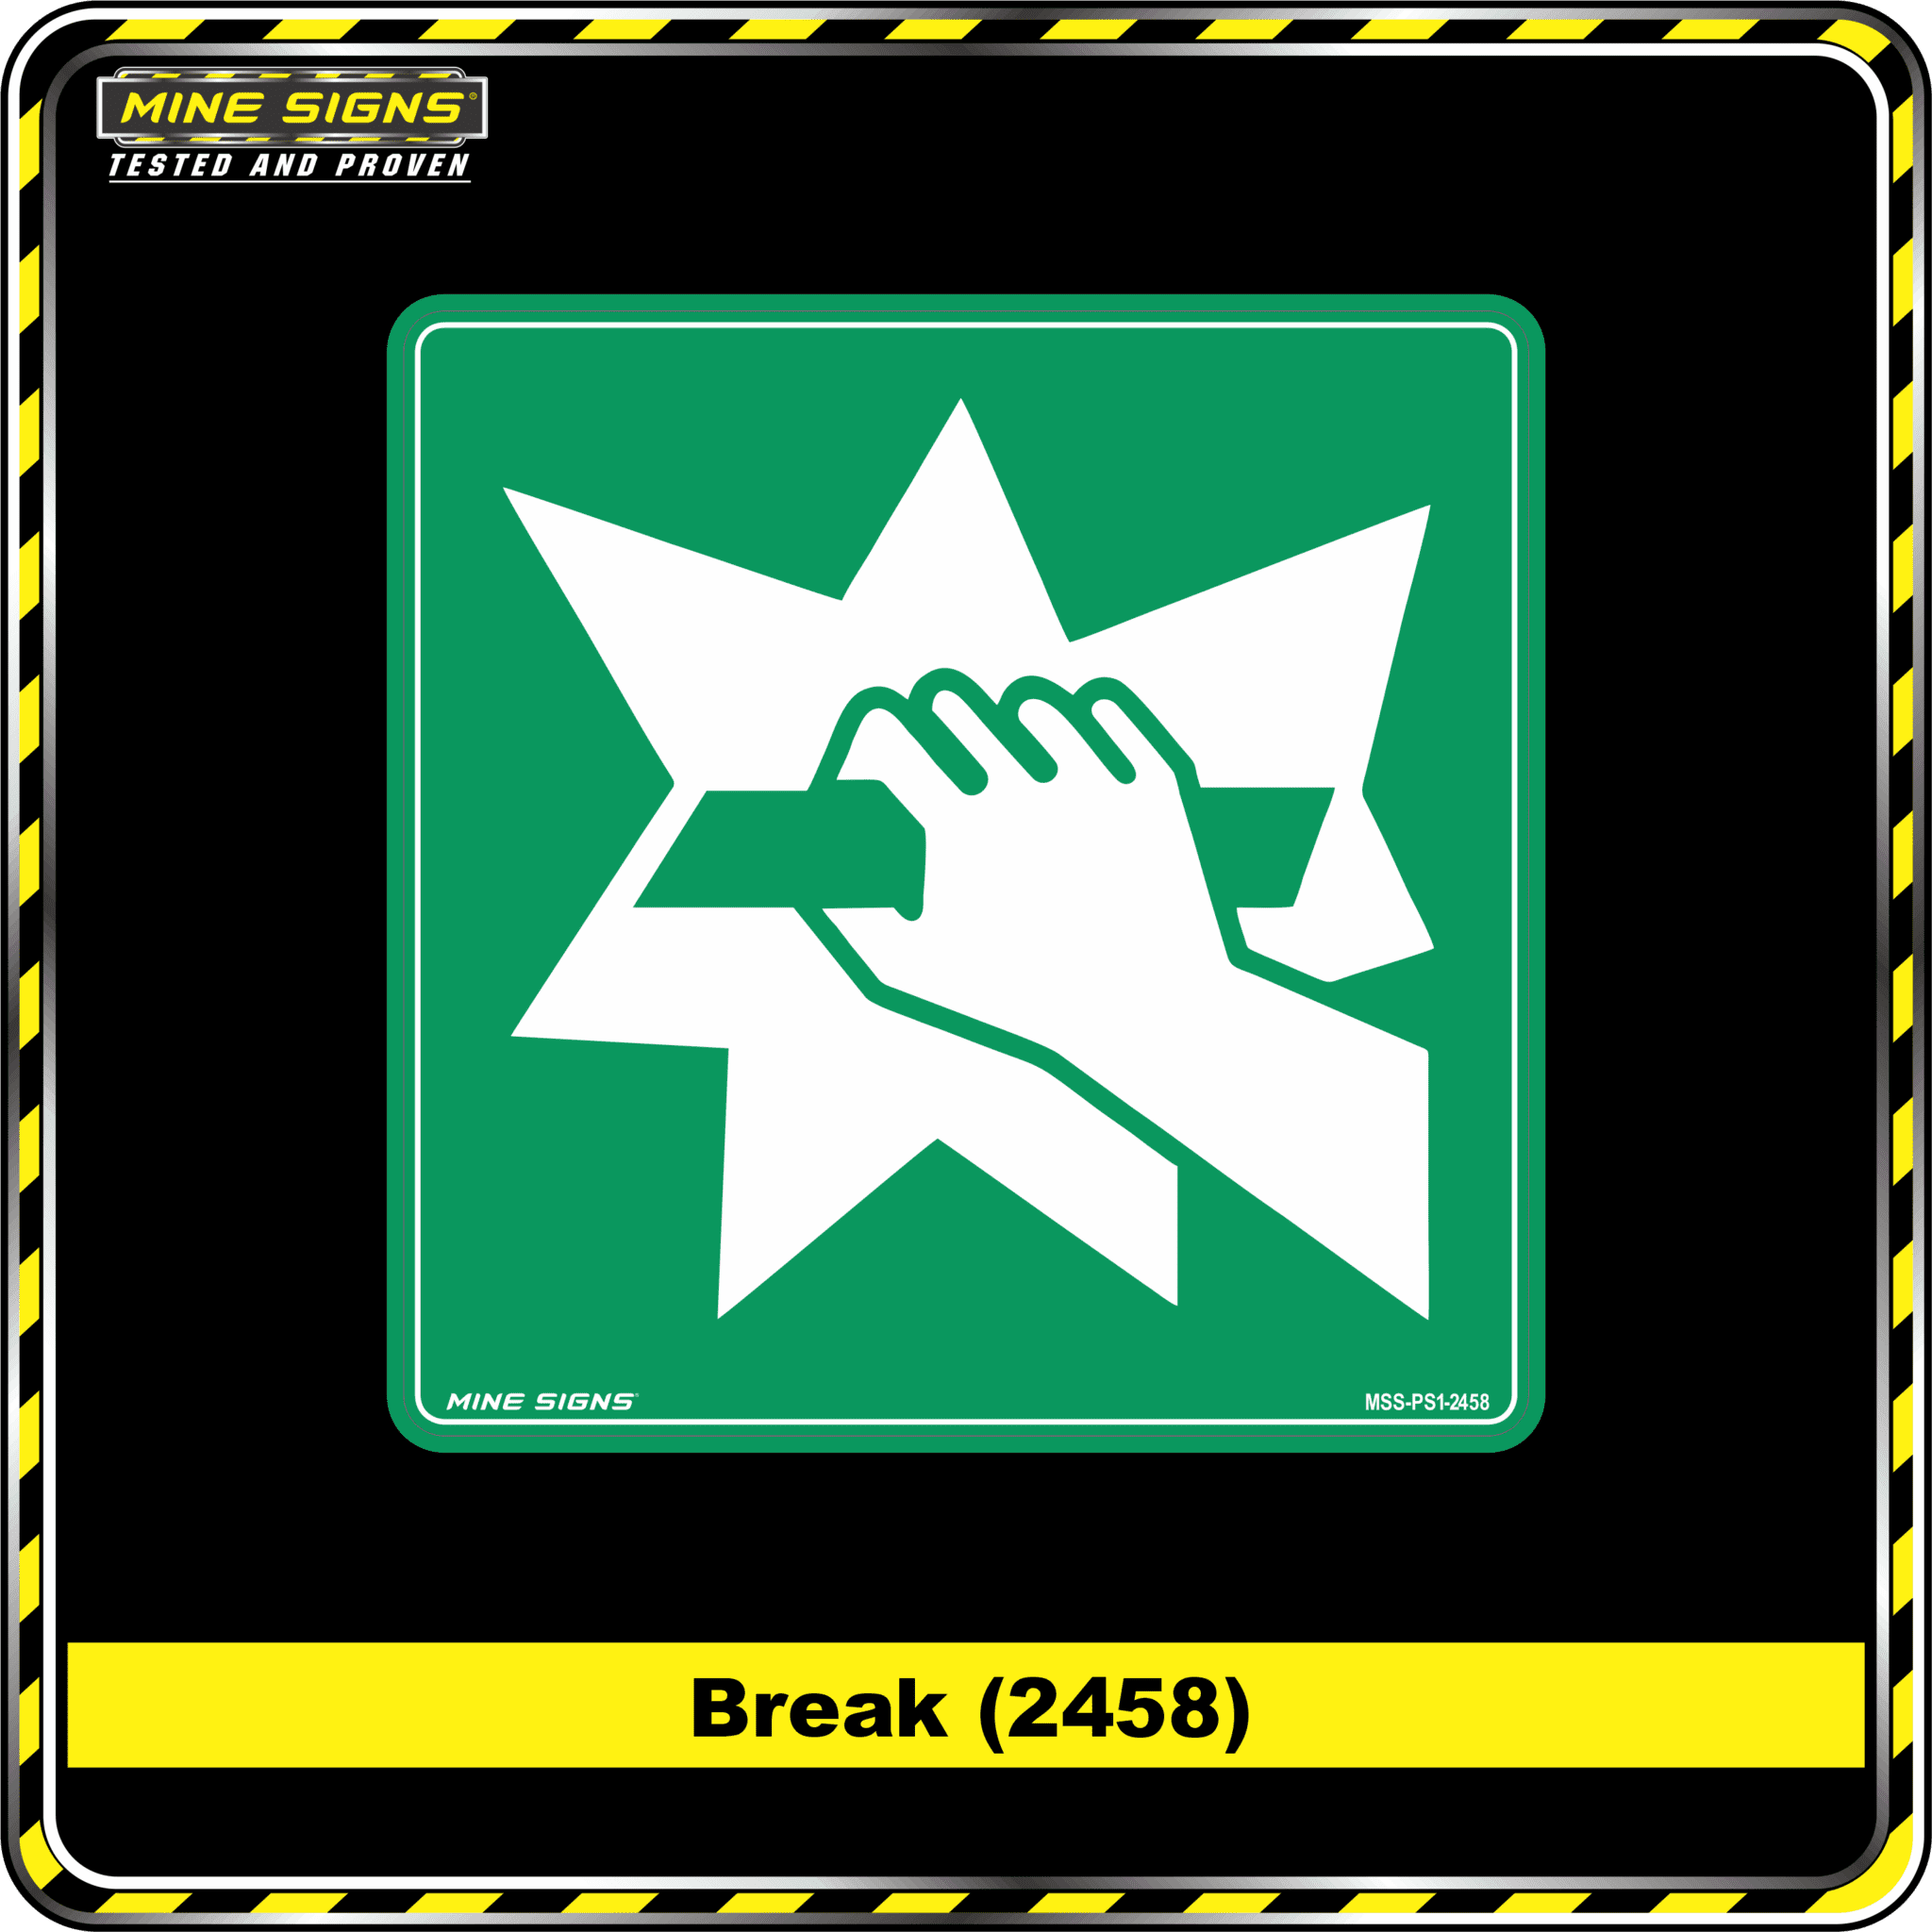 MS - Product Background - Safety Signs - Break 2458